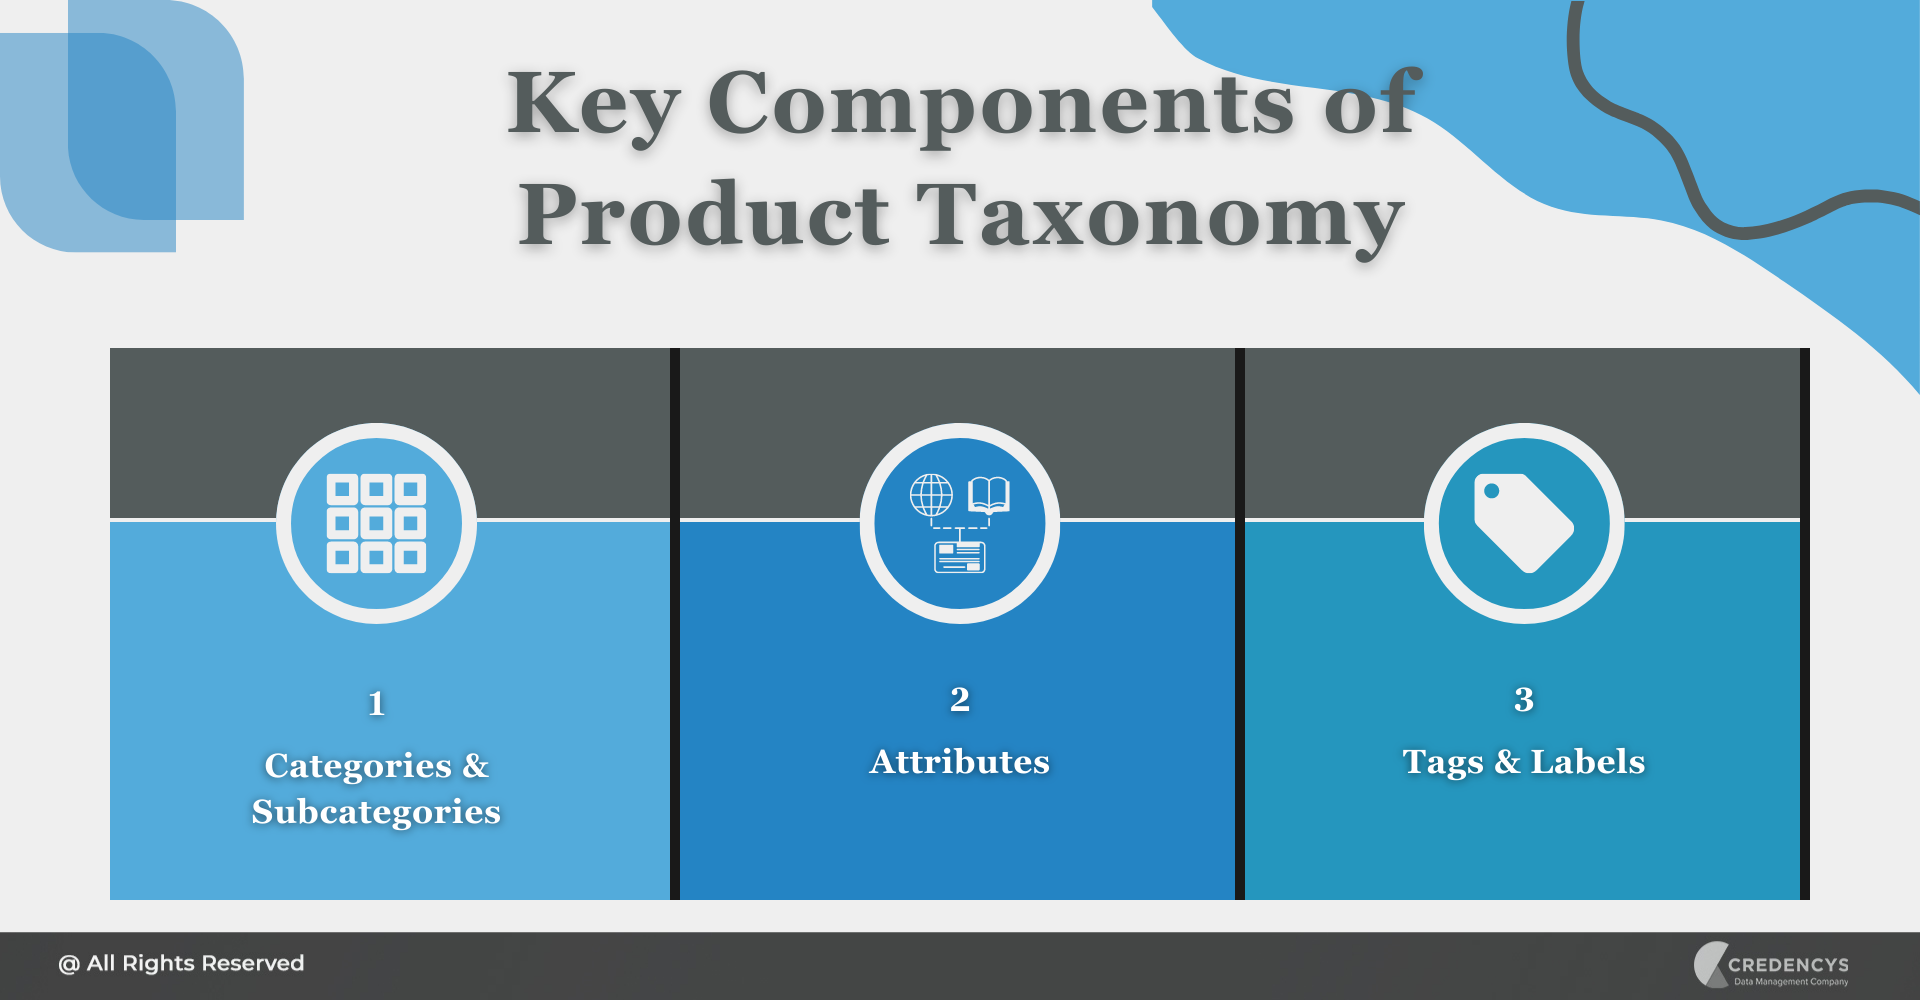 Key Components of Product Taxonomy